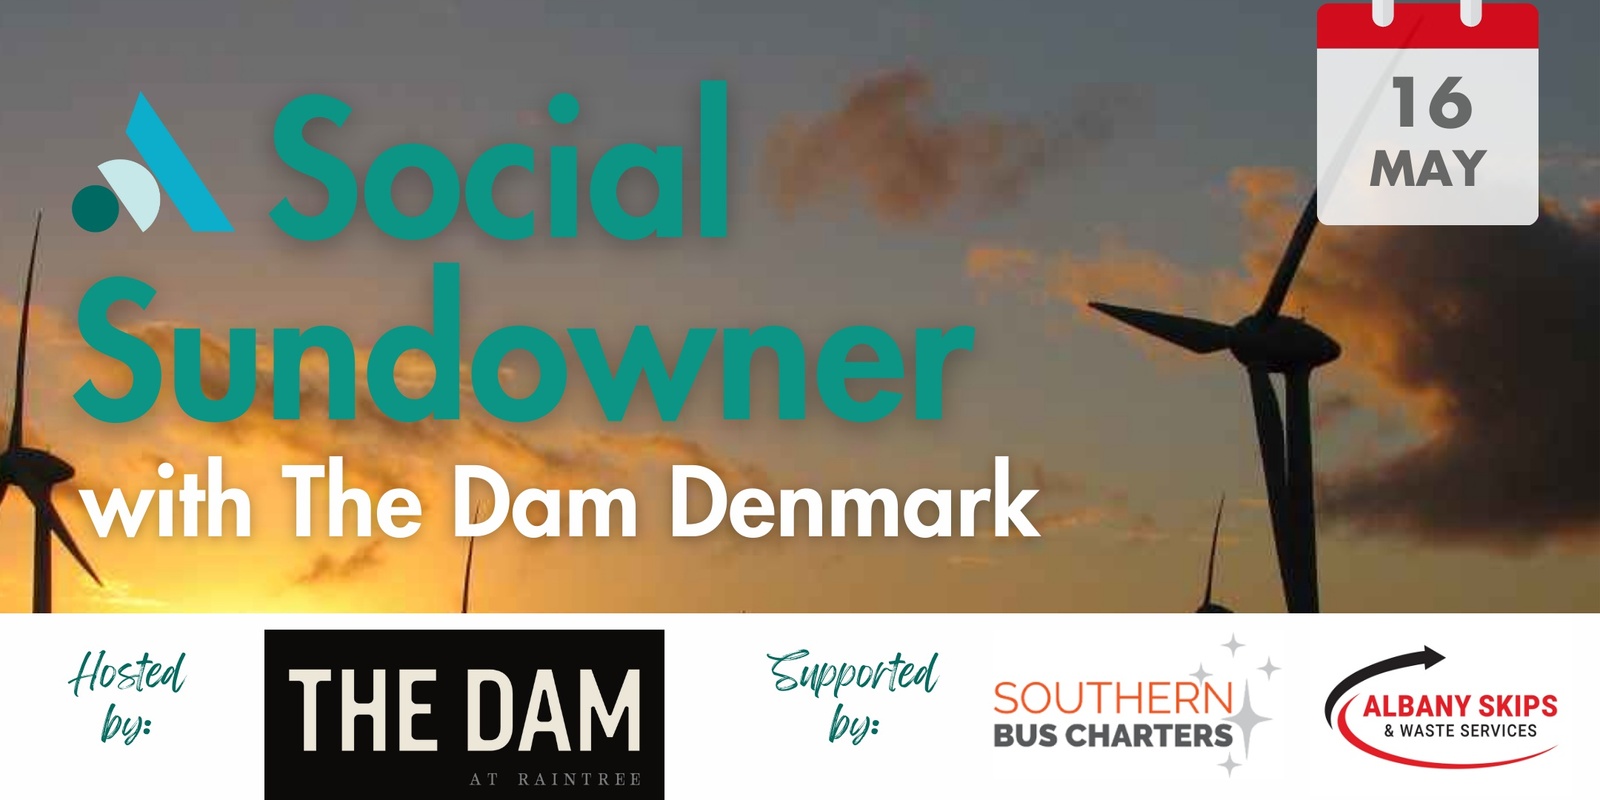 Banner image for ACCI Social Sundowners with The Dam Denmark